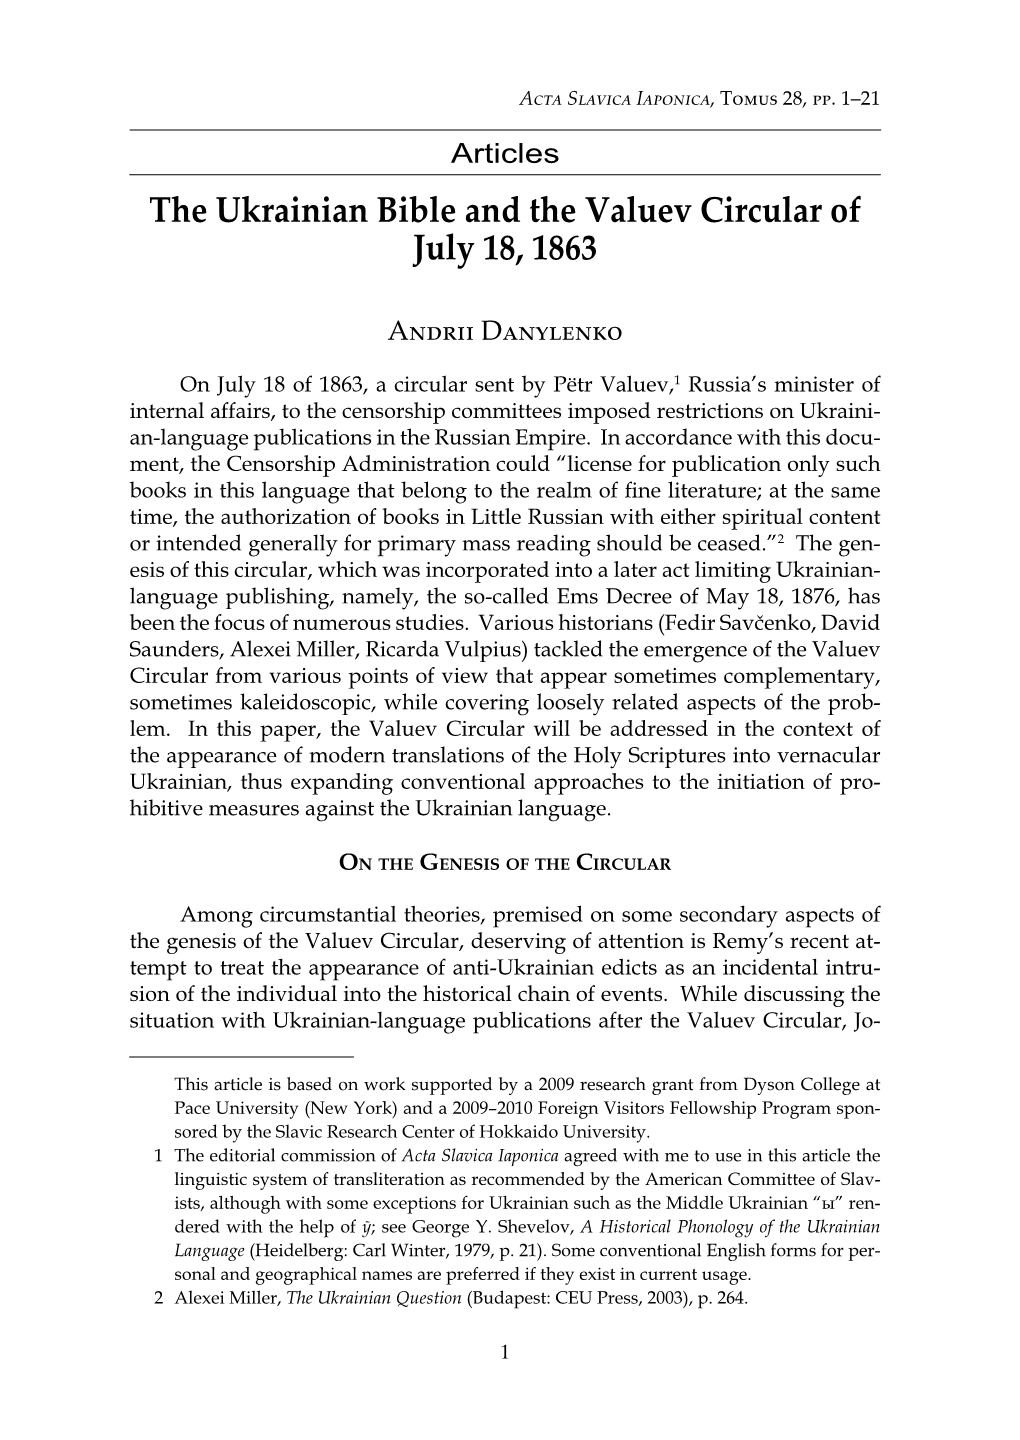 The Ukrainian Bible and the Valuev Circular of July 18, 1863